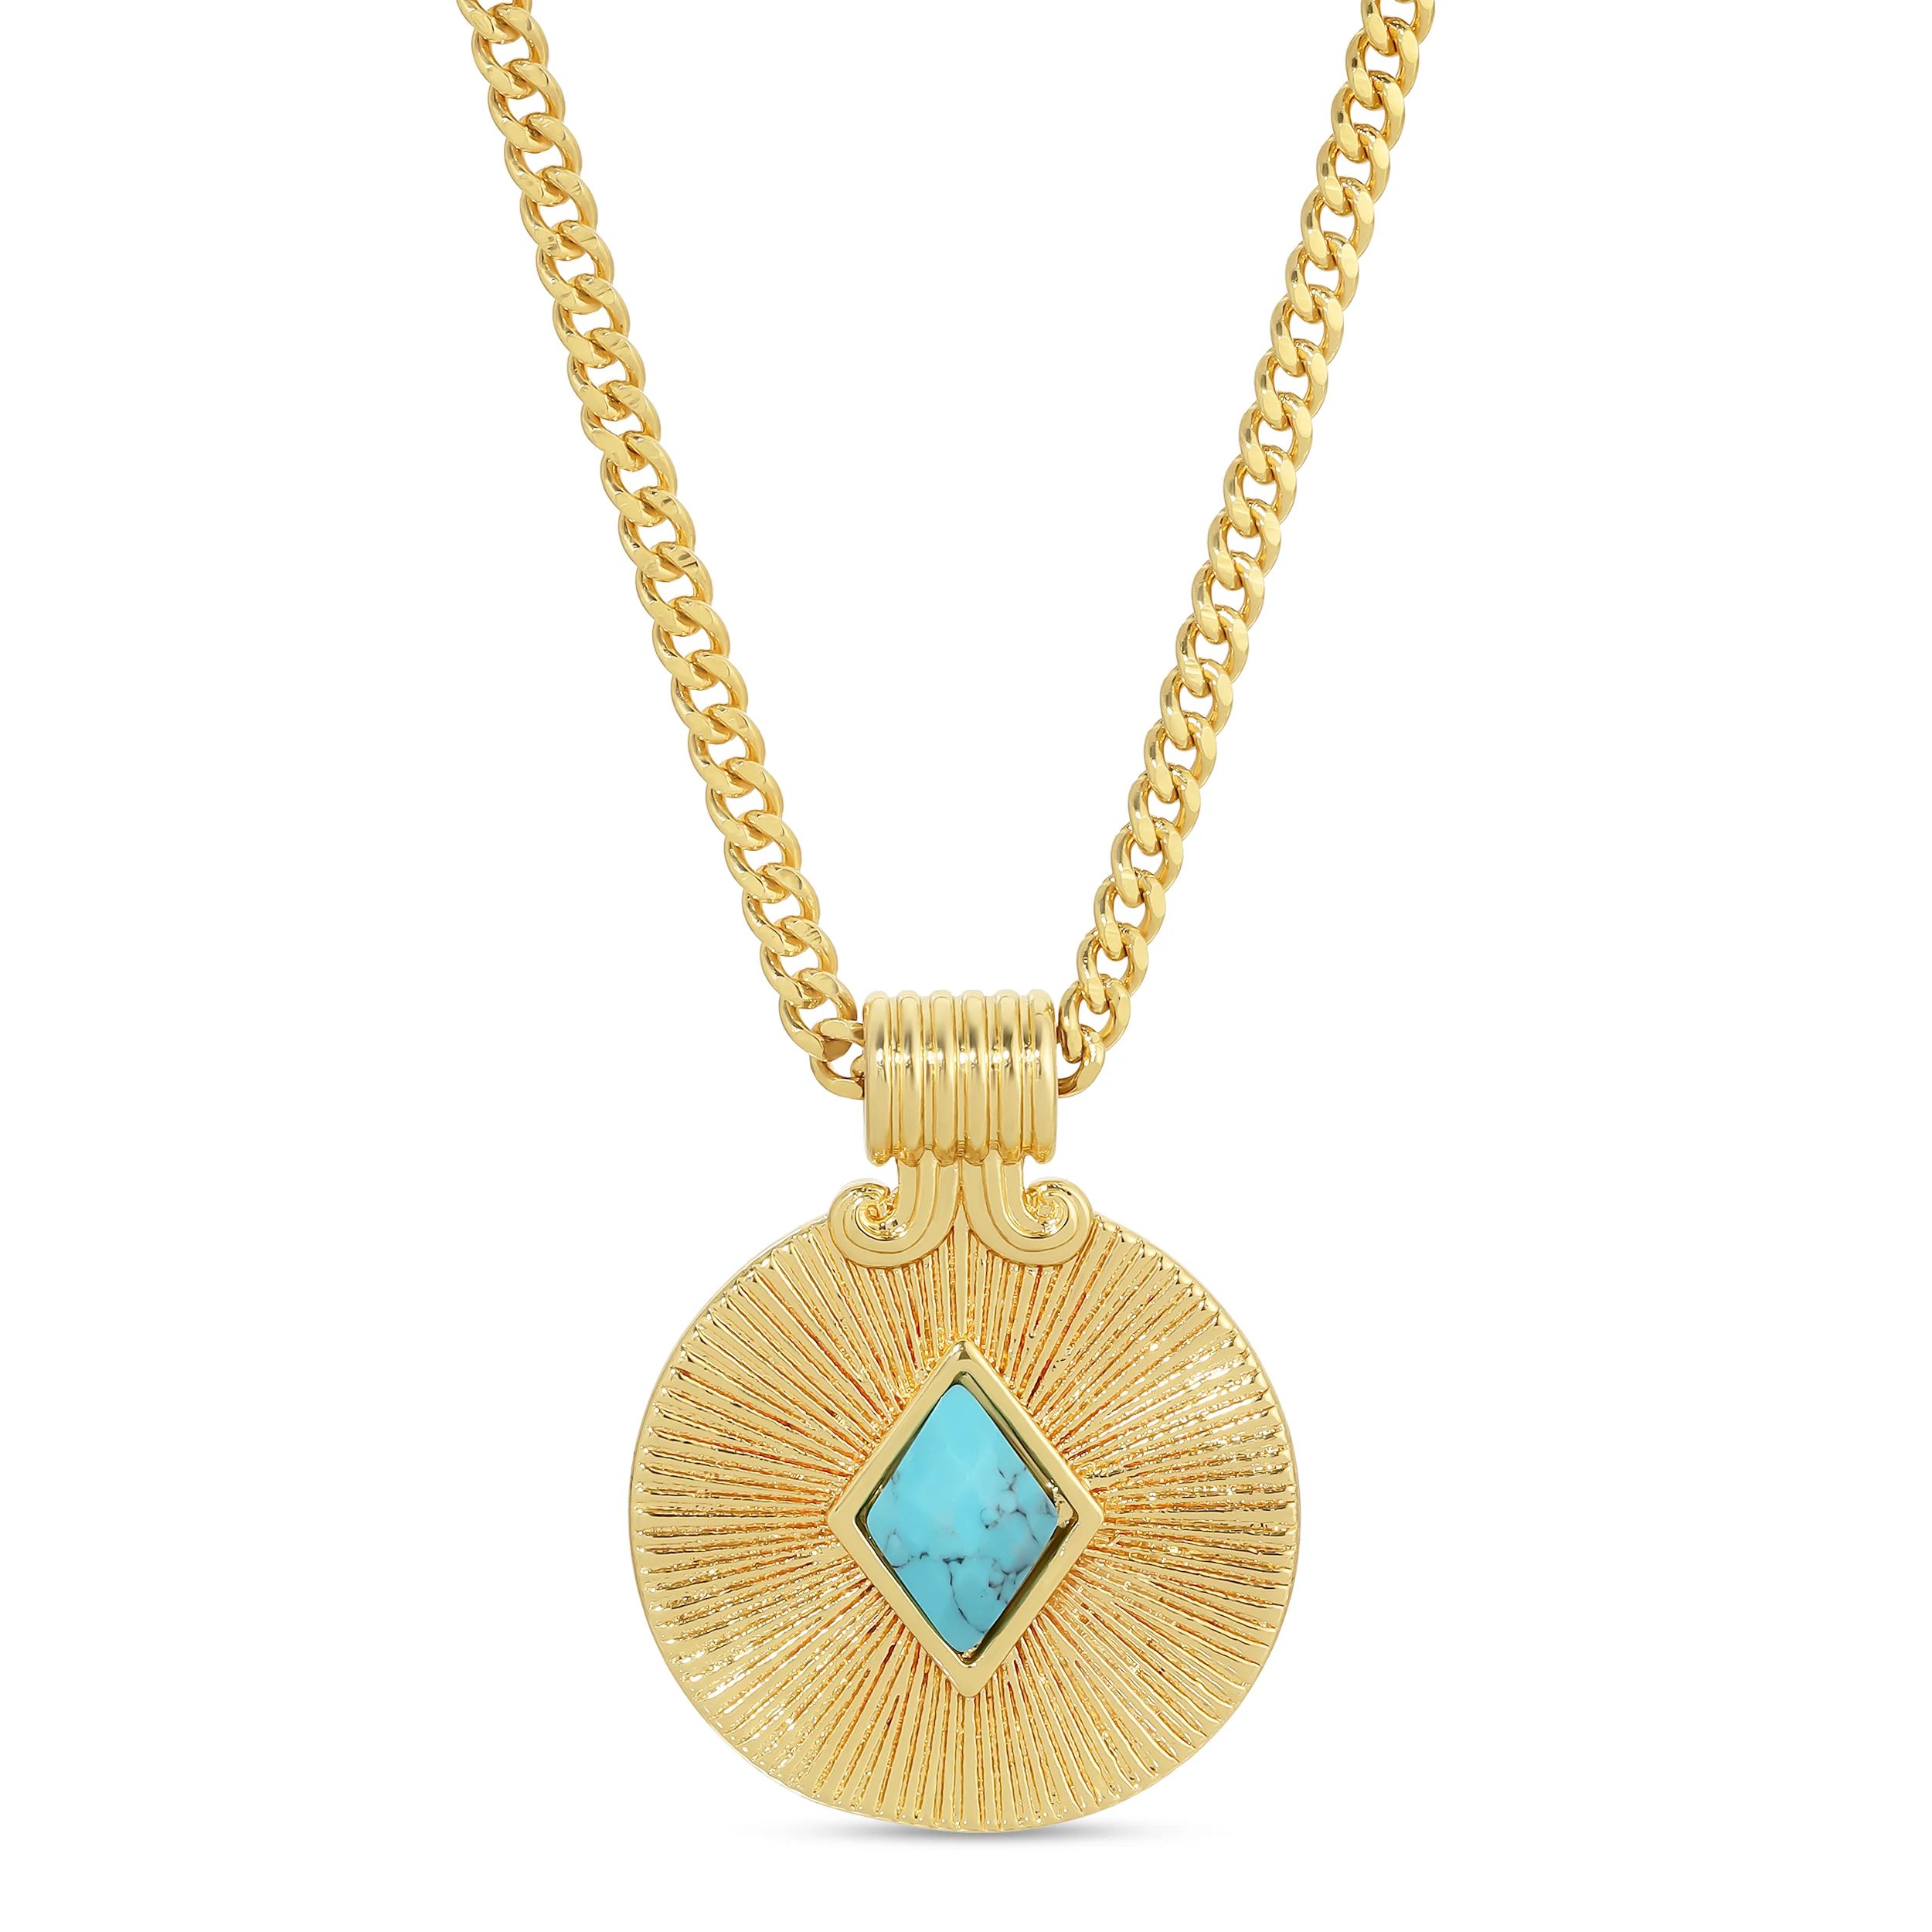 Turquoise Medallion Necklace | Meghan Bo Designs